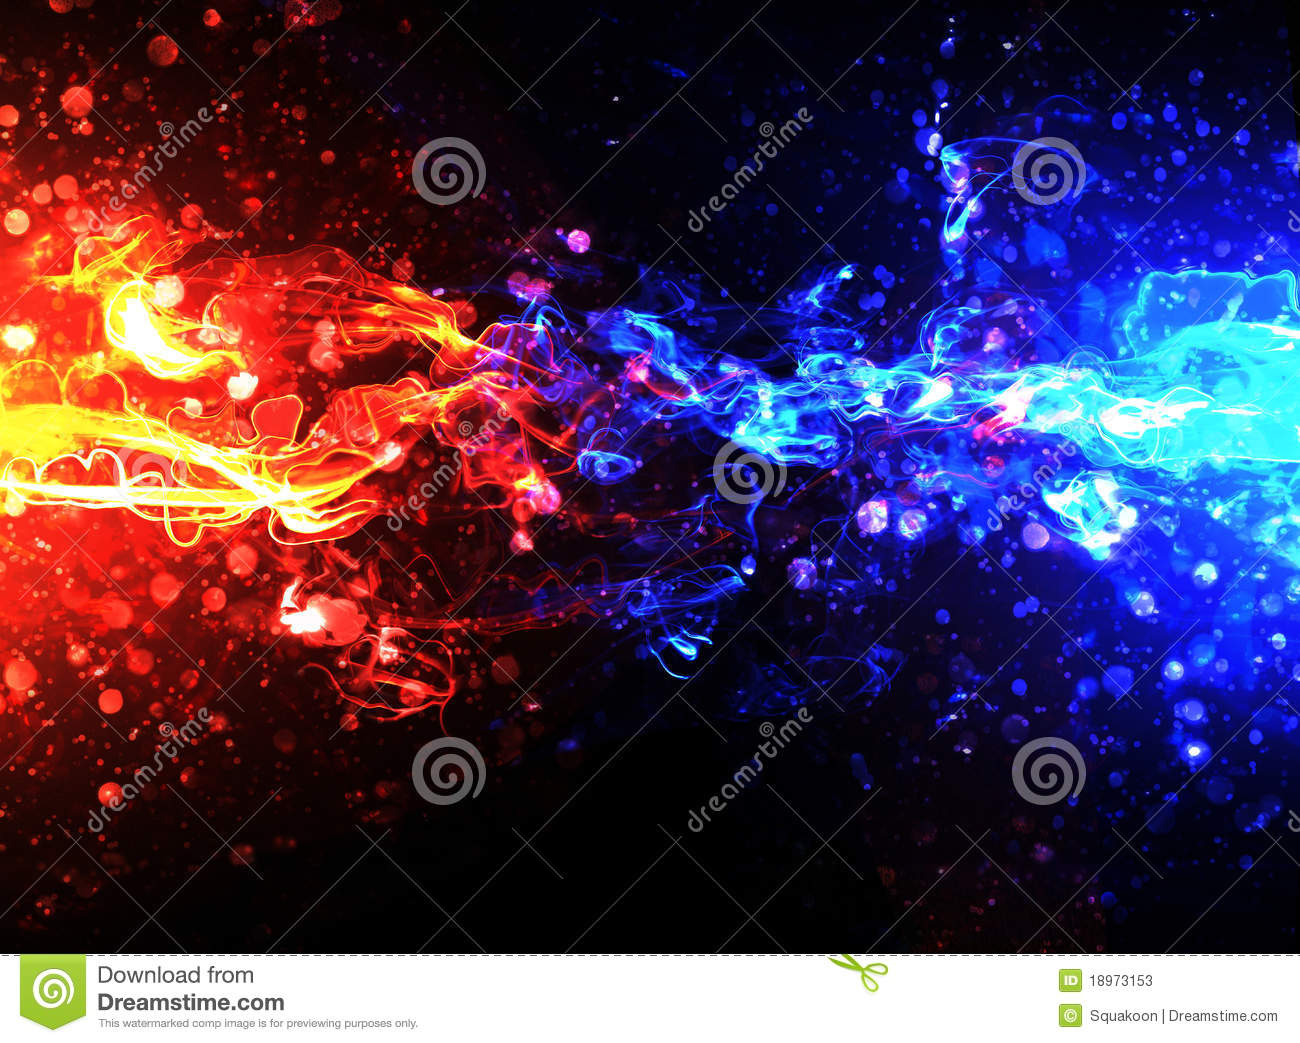 Blue And Red Fire Wallpaper Blue and red fire 1300x1043